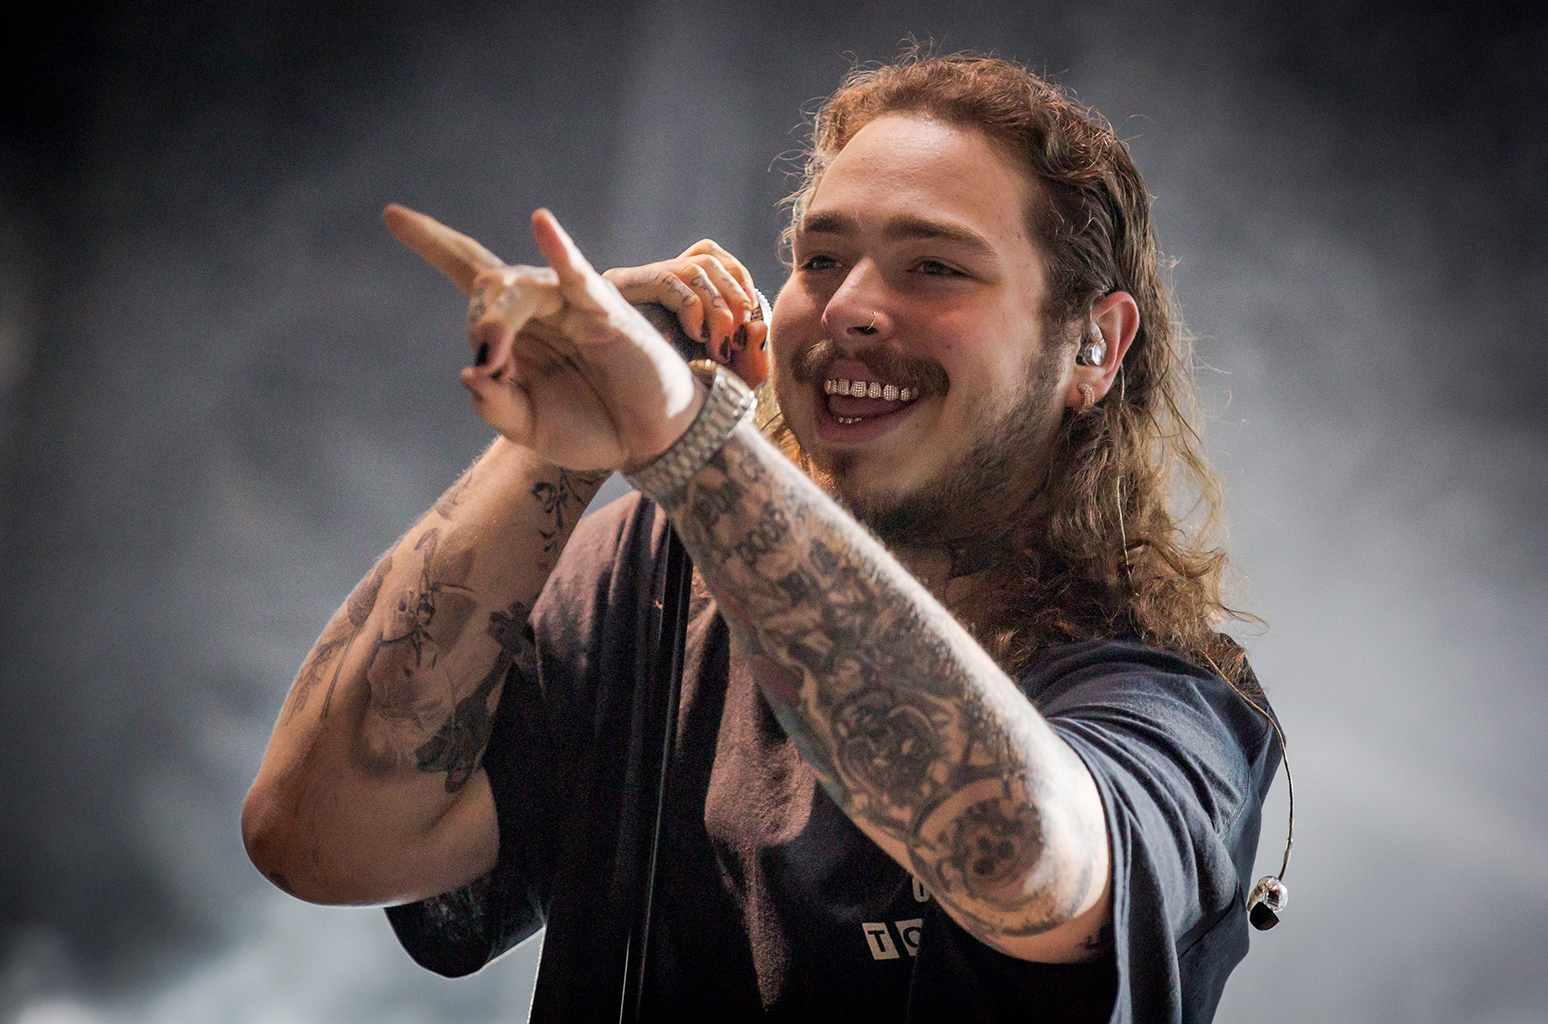 The 10 Best Post Malone Songs (Updated 2017)